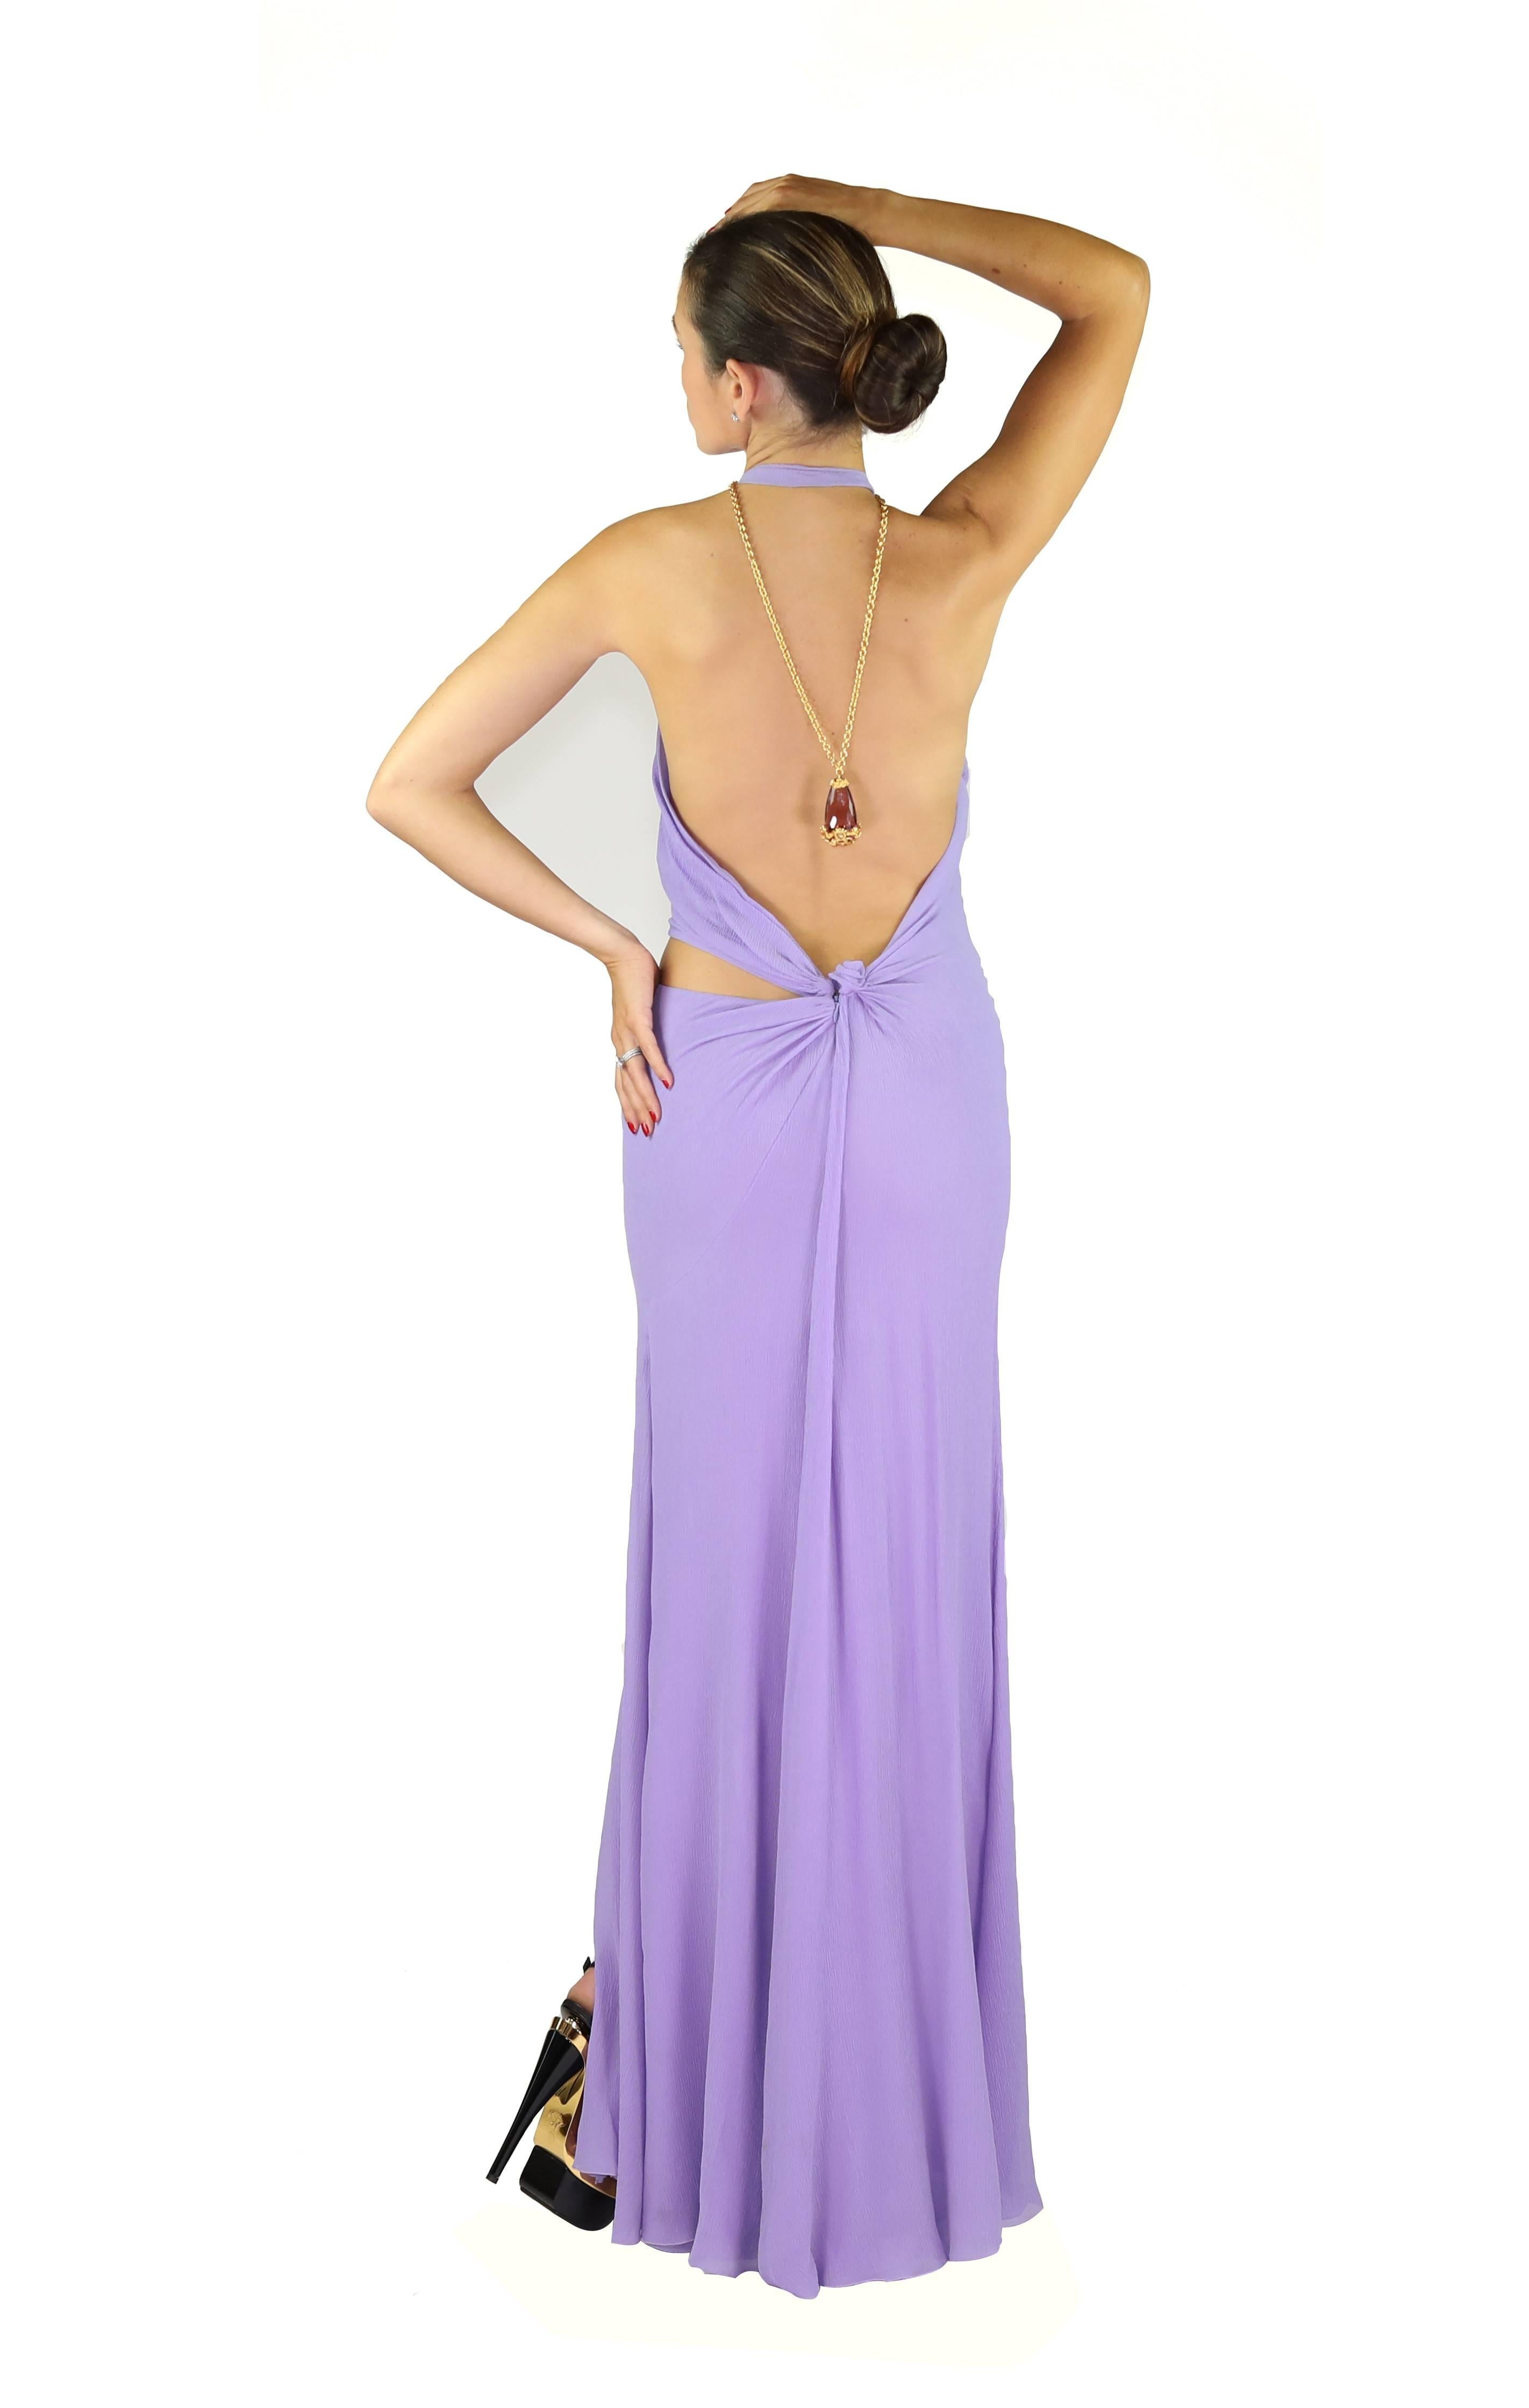 VINTAGE GIANNI VERSACE COUTURE OPEN BACK LILAC SILK DRESS Size 42 - 6 1